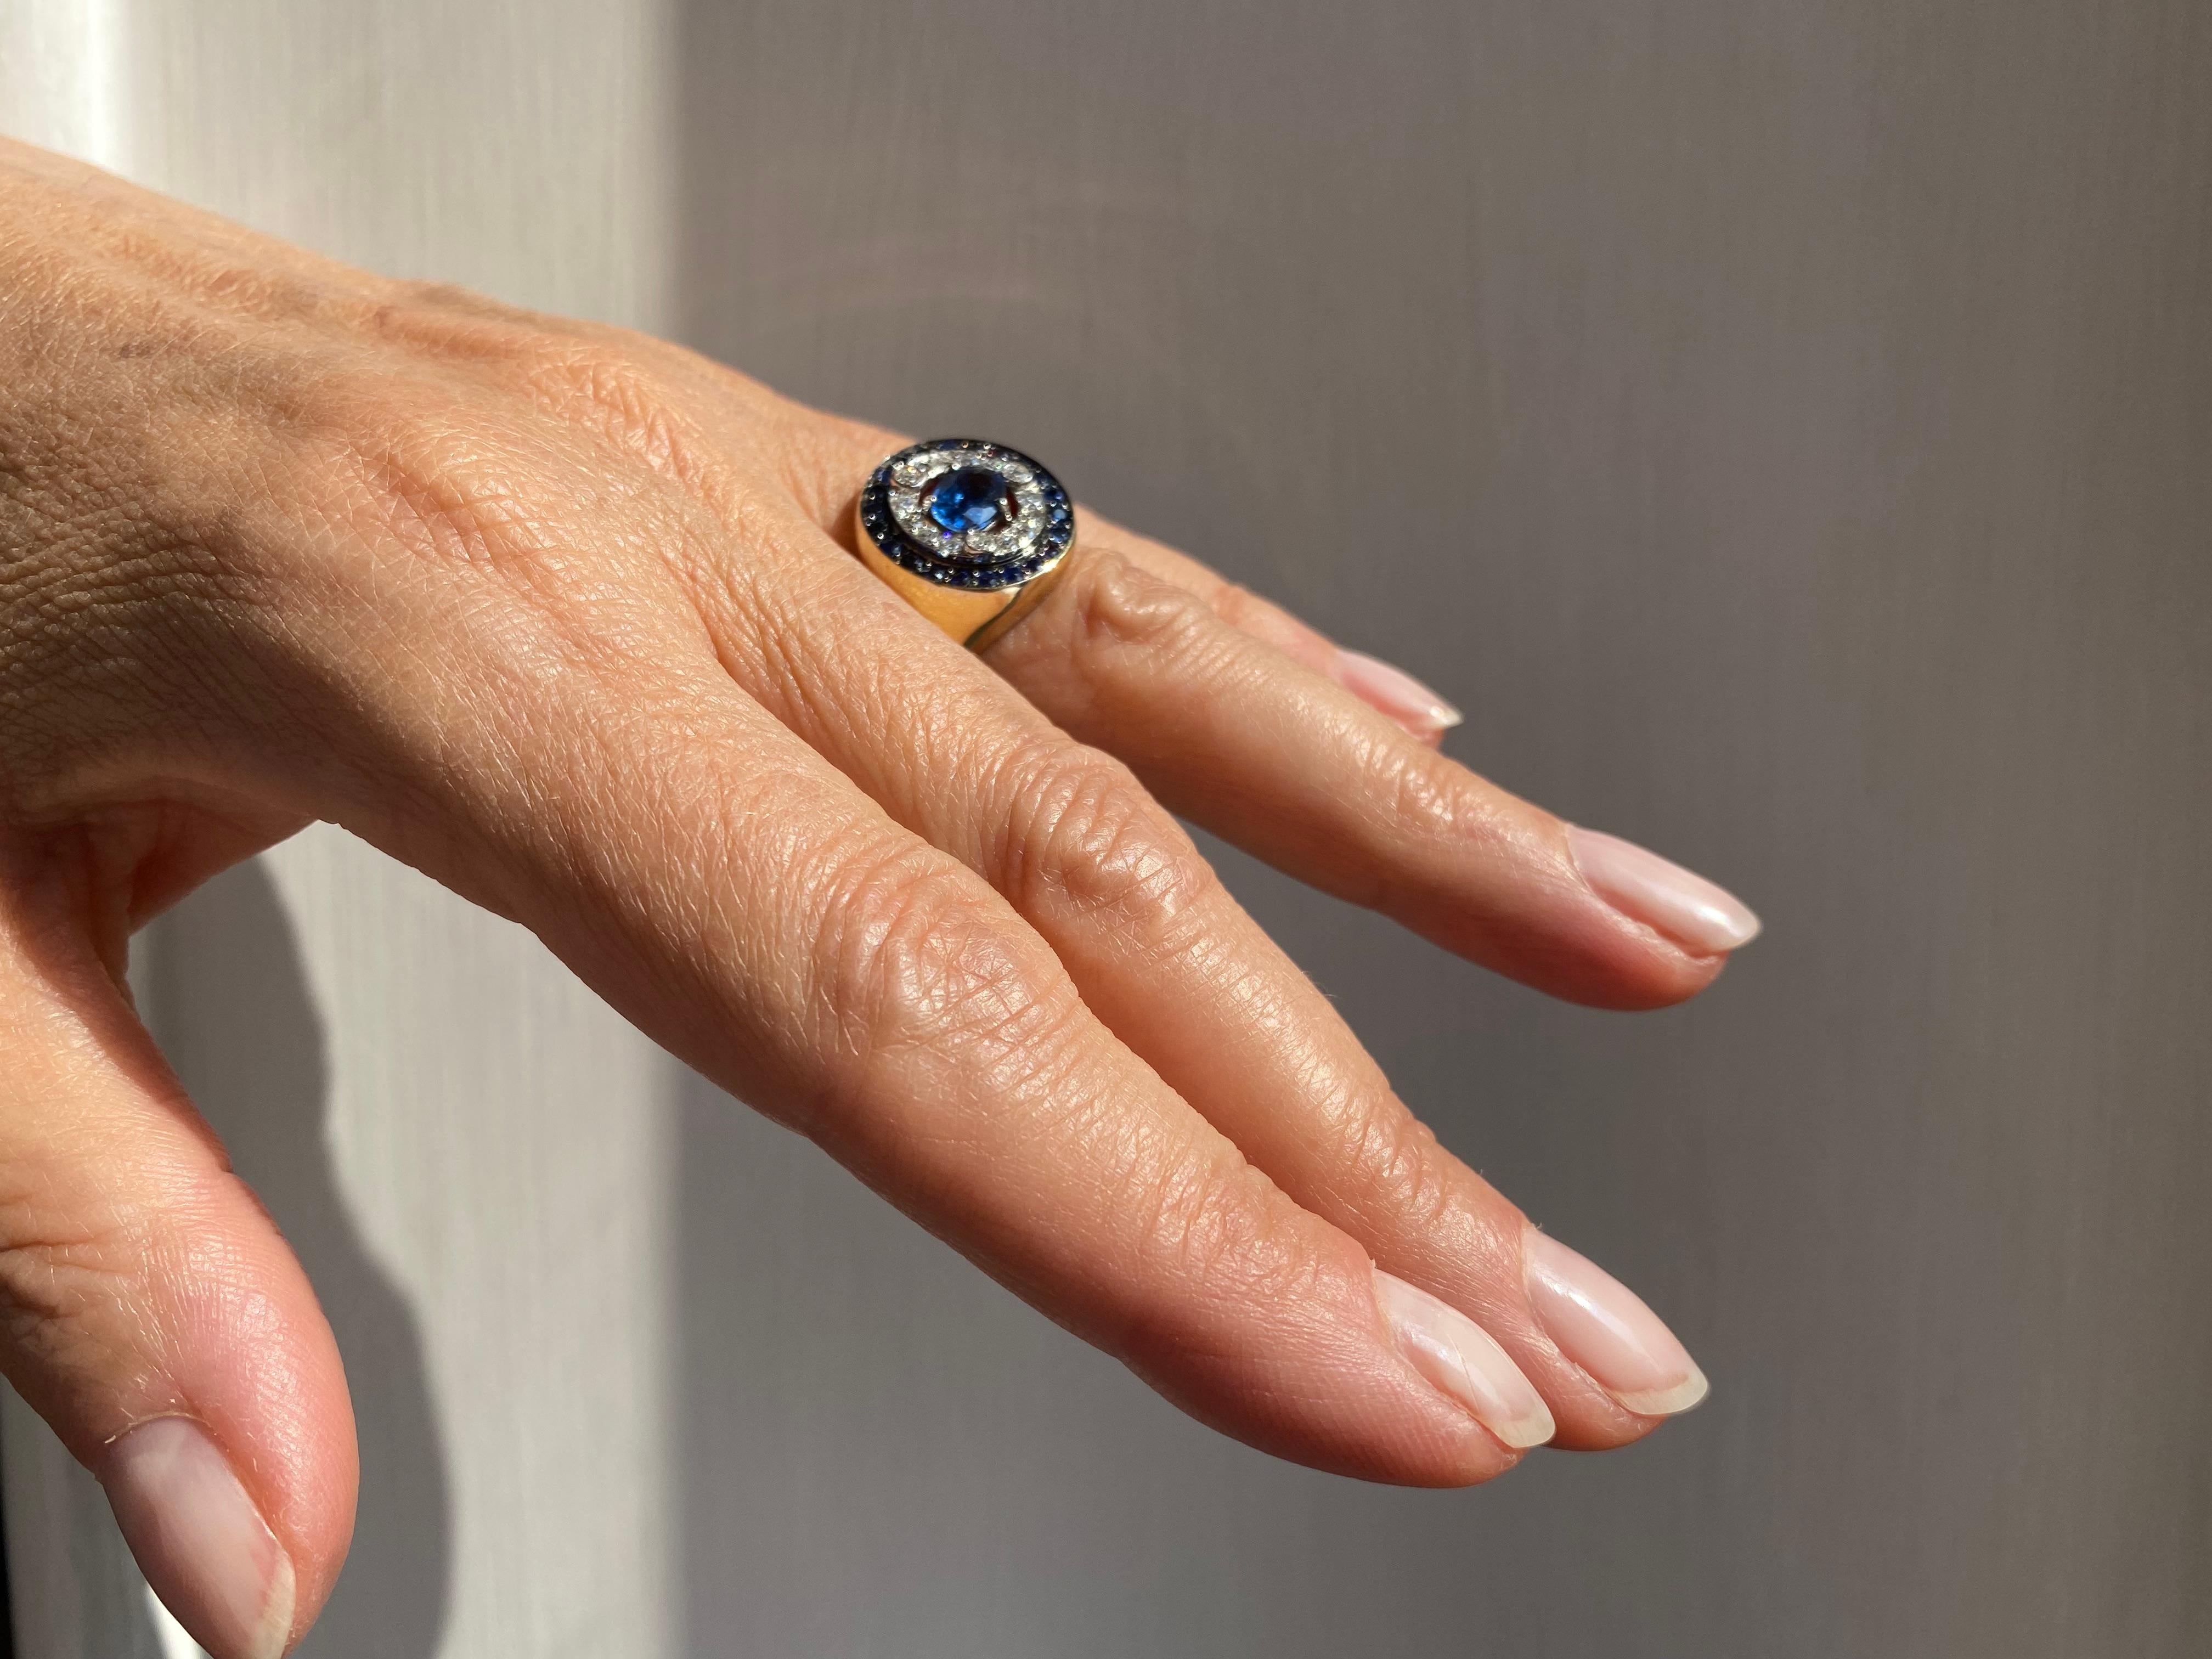 Rossella Ugolini Design Collection 1.62 Karat Sapphires 0.33 White Diamonds 18 Karat Gold Modern Style Design Ring. This 18k gold ring showcases a unique and captivating design inspired by the beauty of the Helix Nebula. The center of the ring